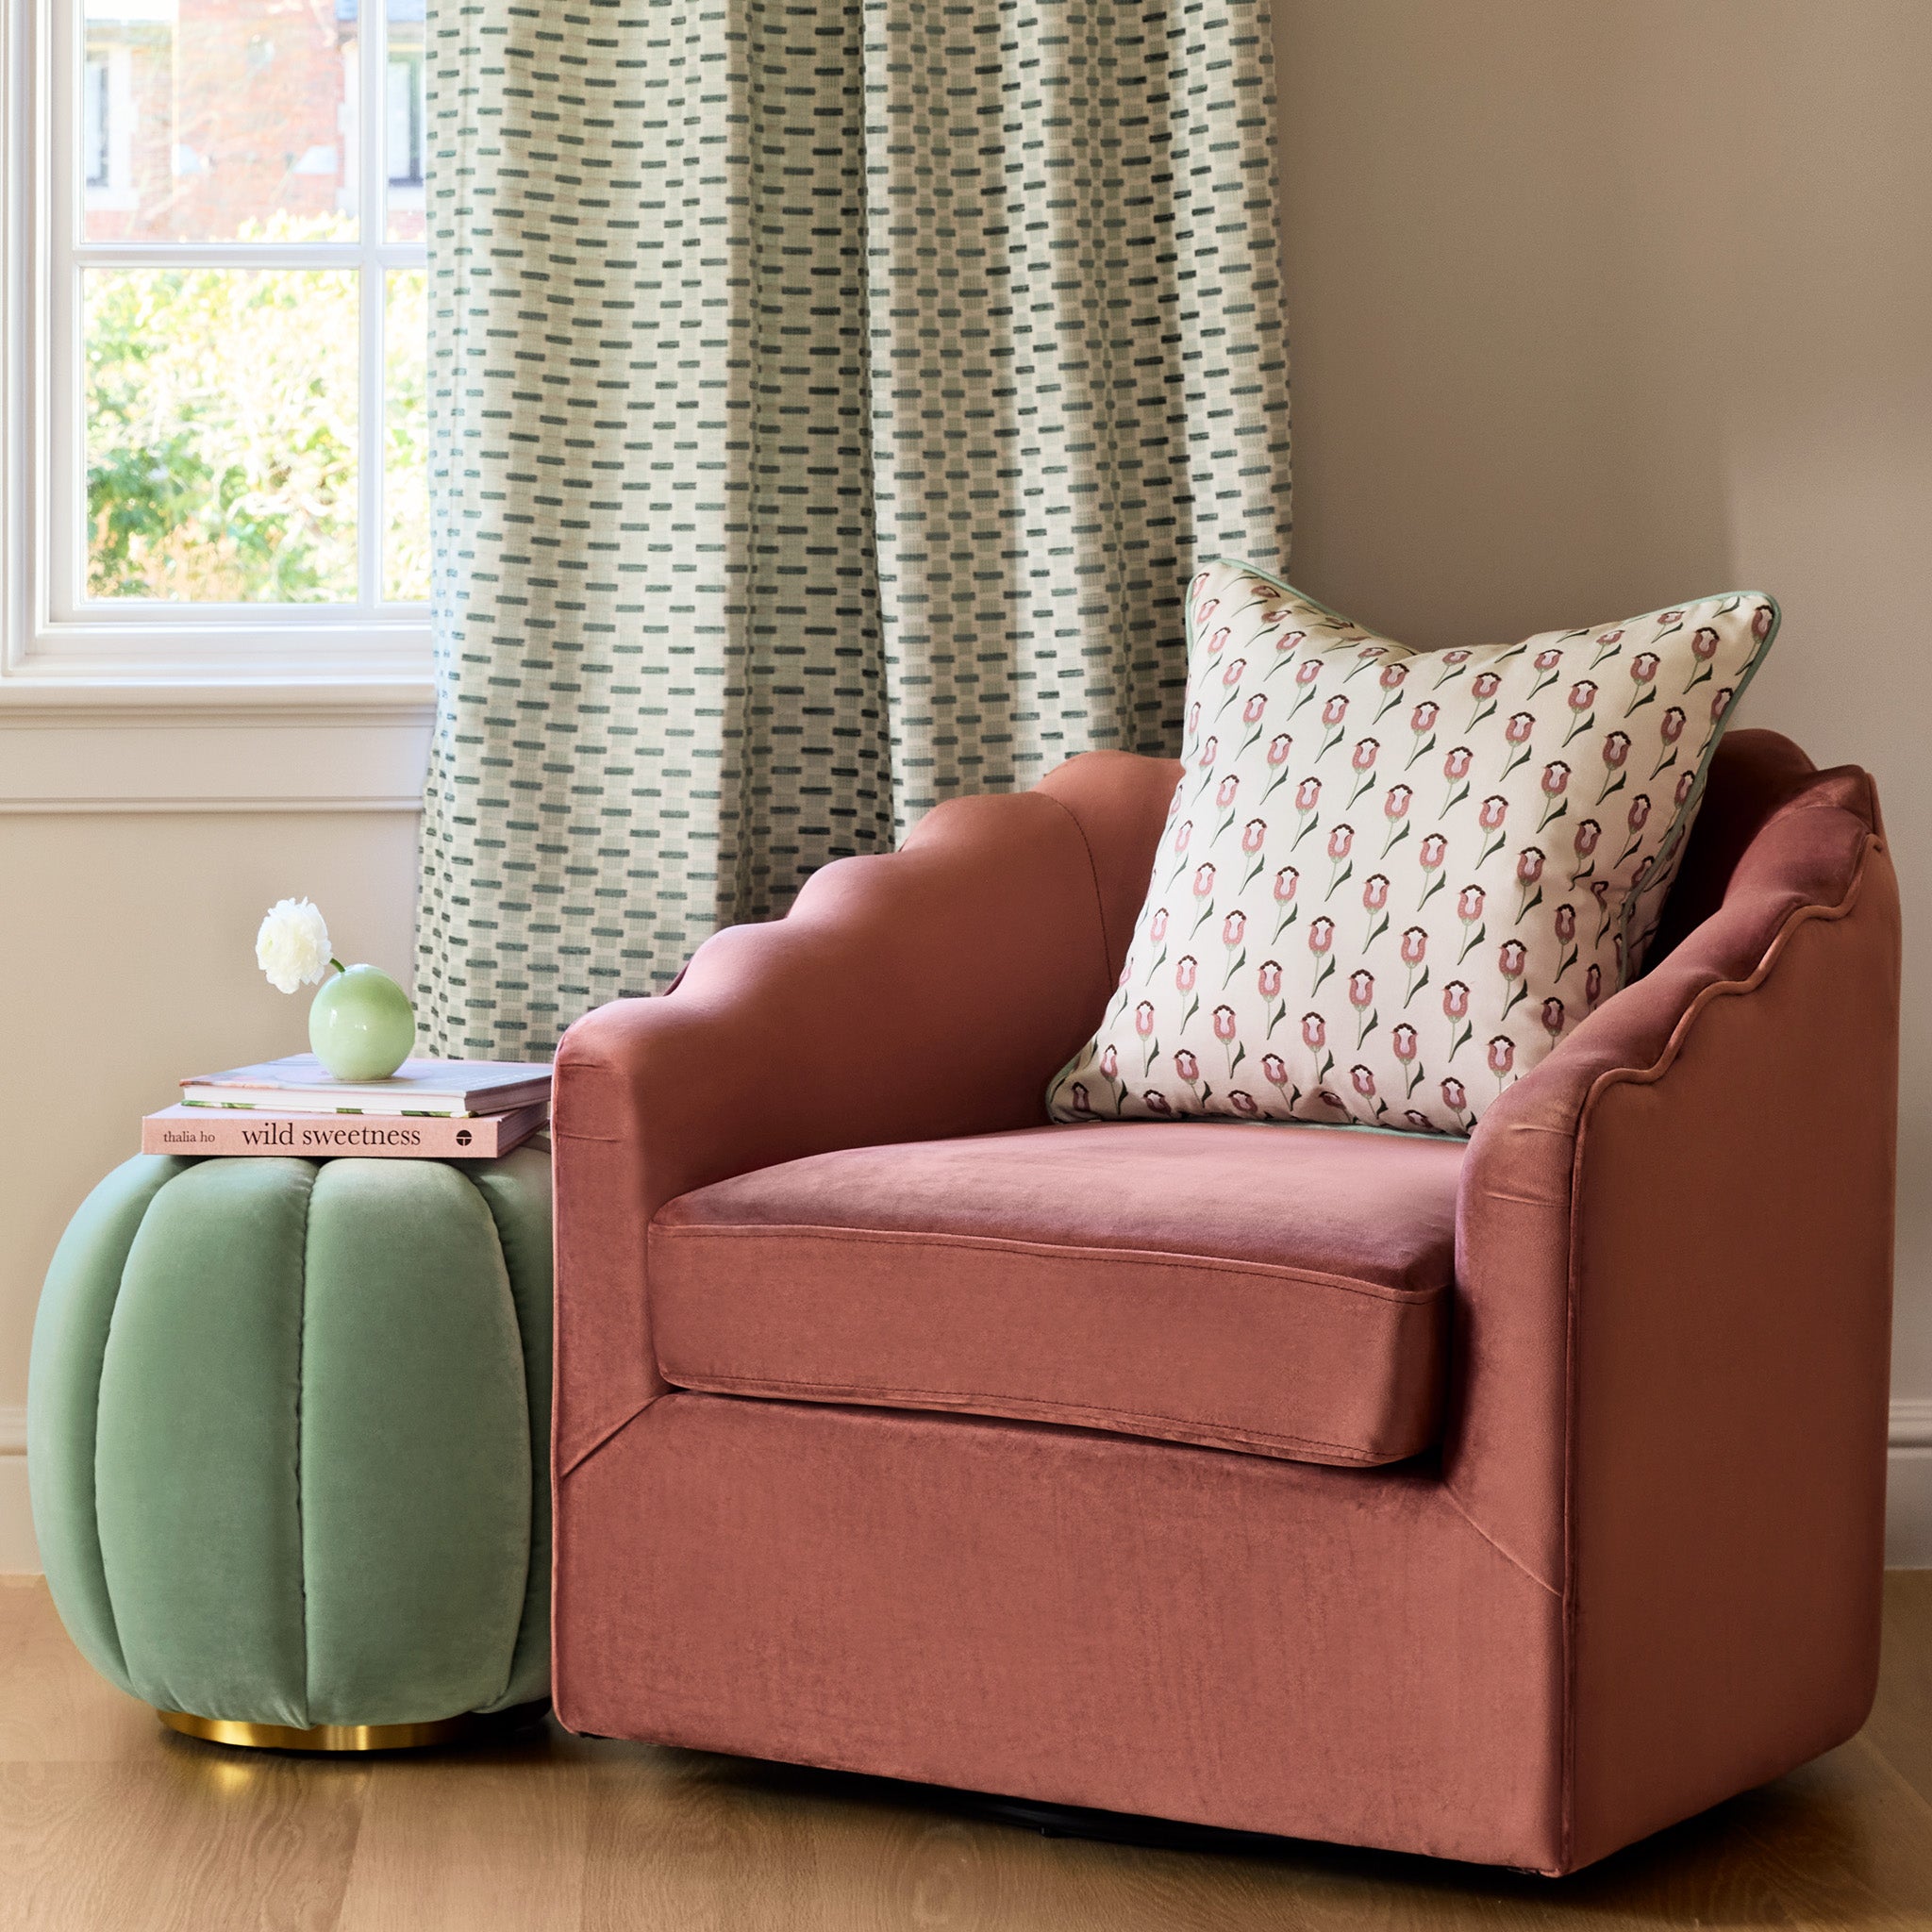  abstract floral pink and green printed pillow on a coral colored chair with a mint green ottoman stacked with books